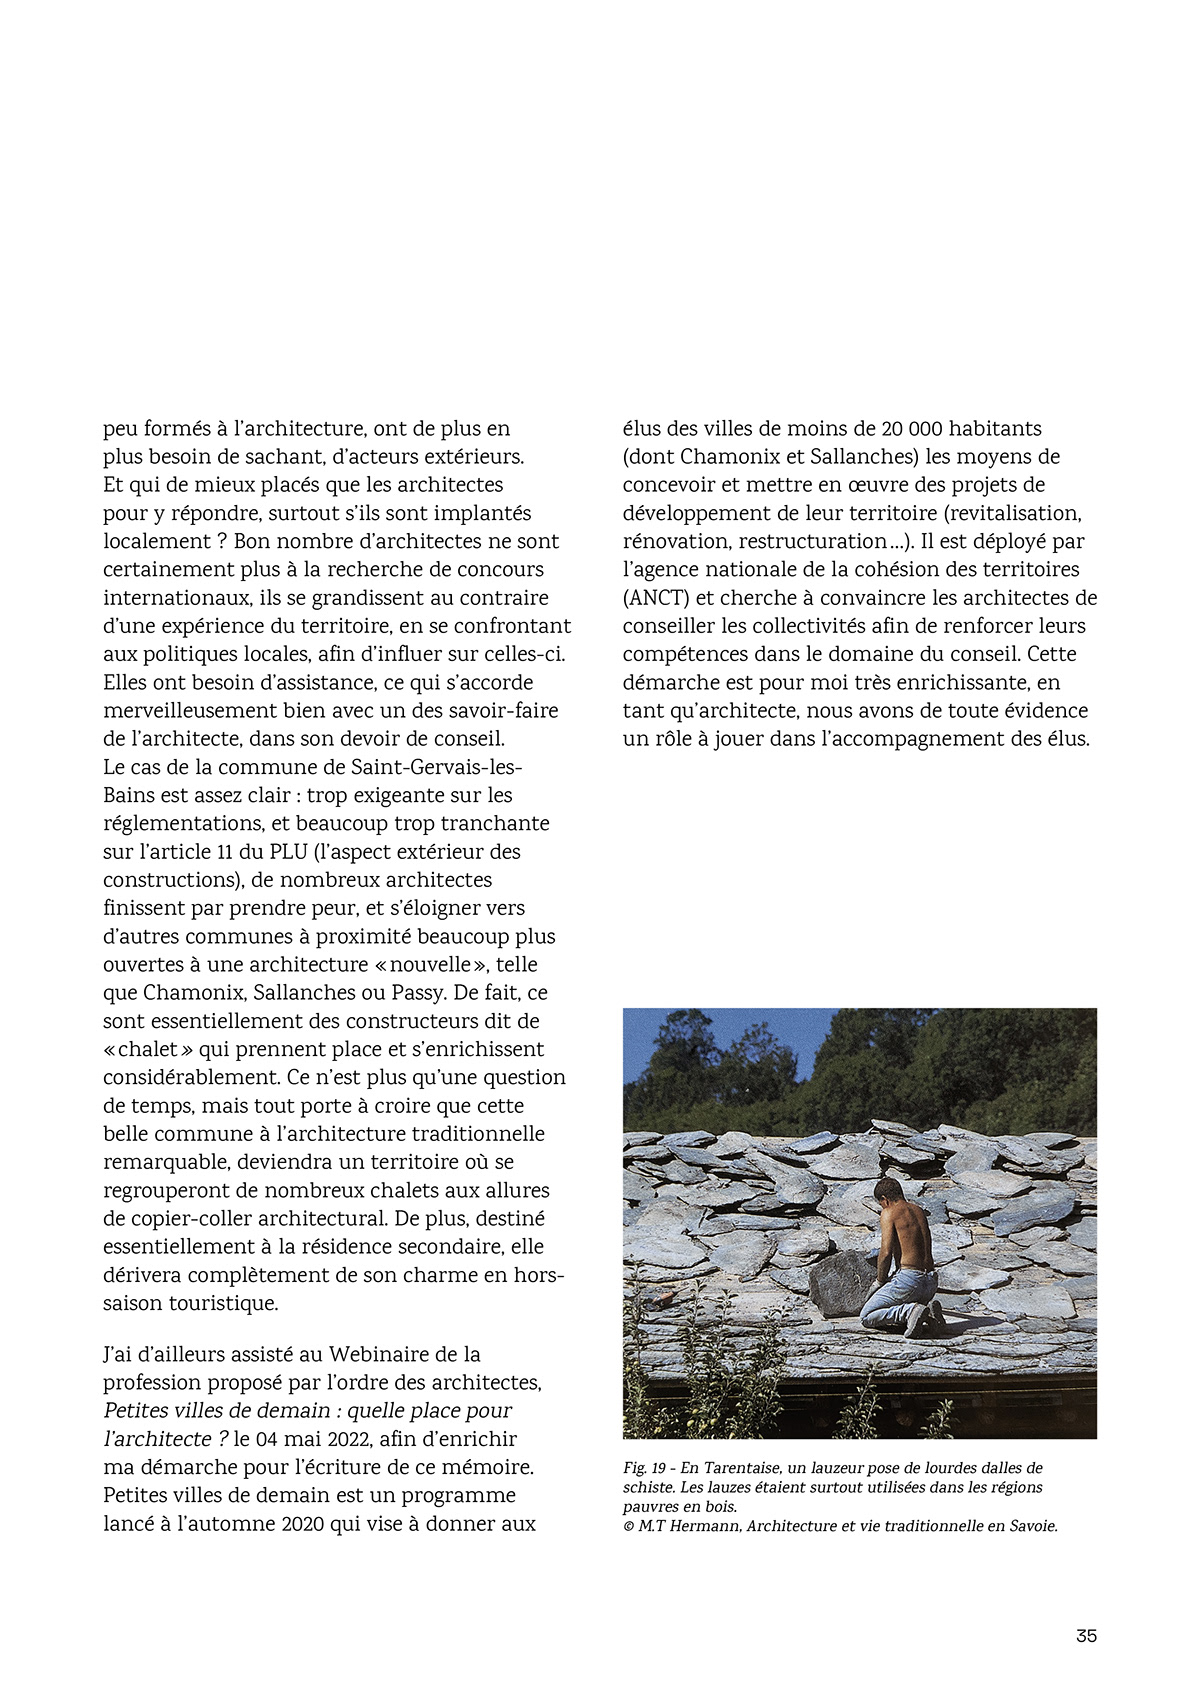 research book editorial essay research project InDesign graphic design  mountains Nature alps